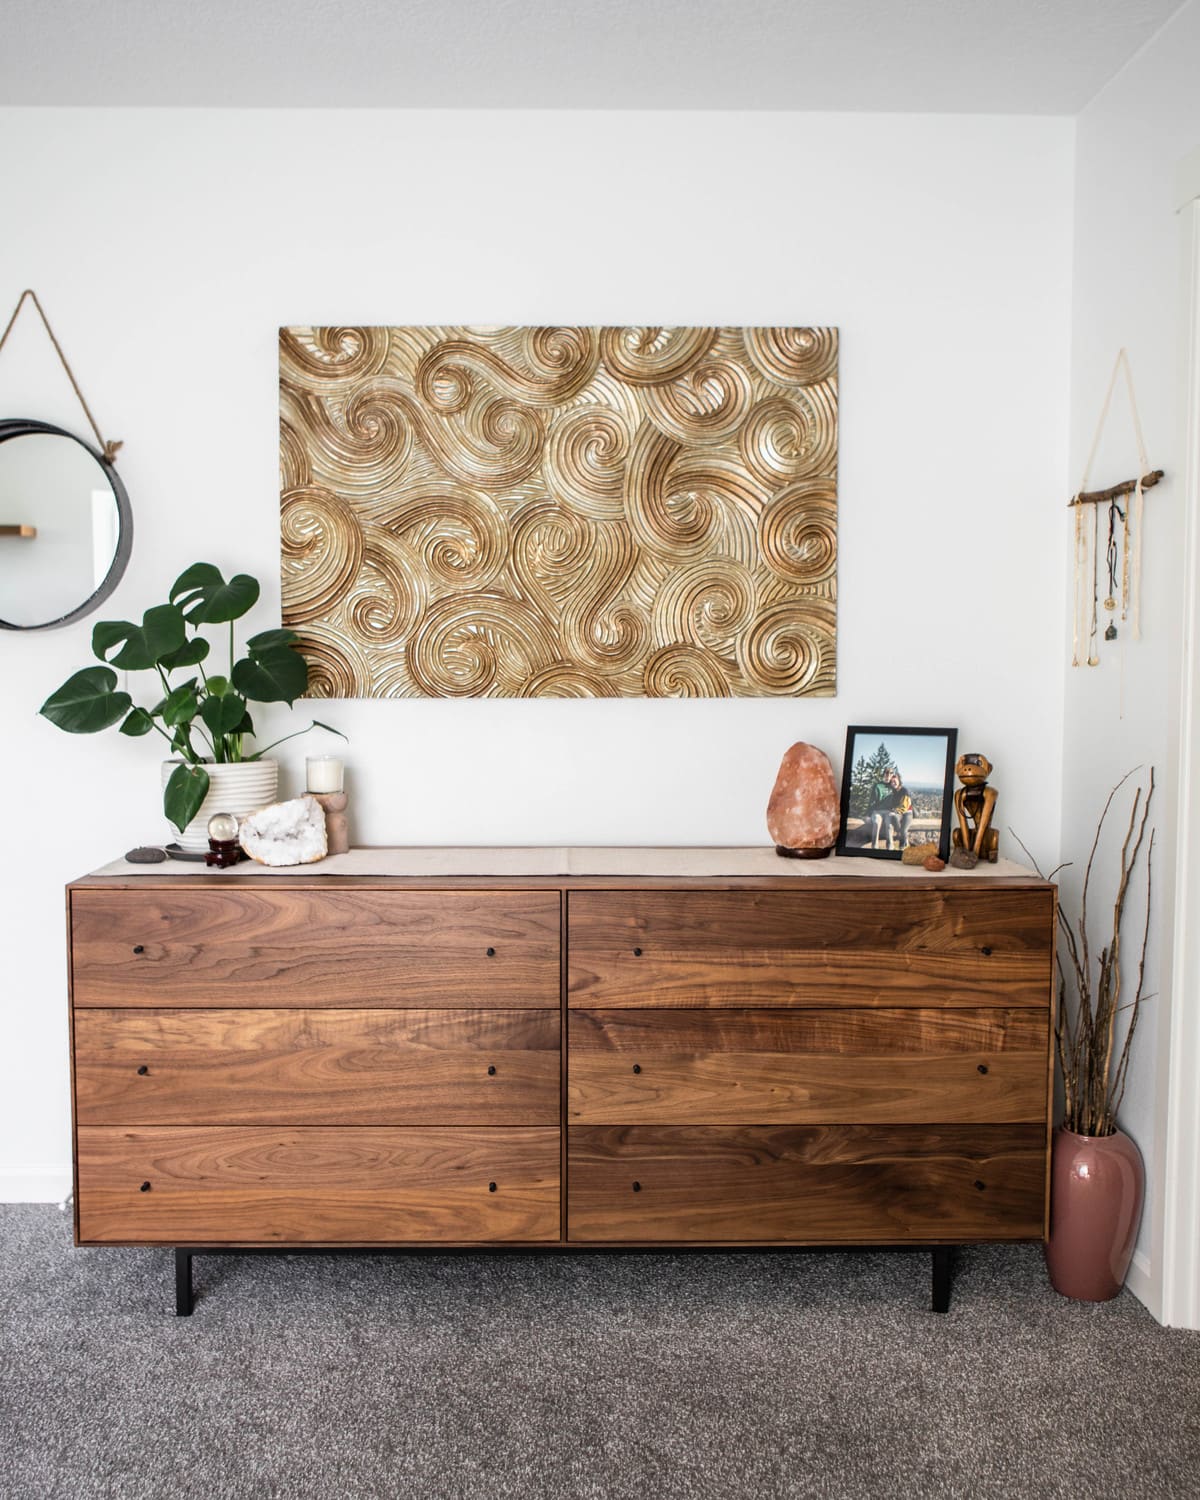 long wooden dresser decorated with pictures, a monstera plant, and gold art collage